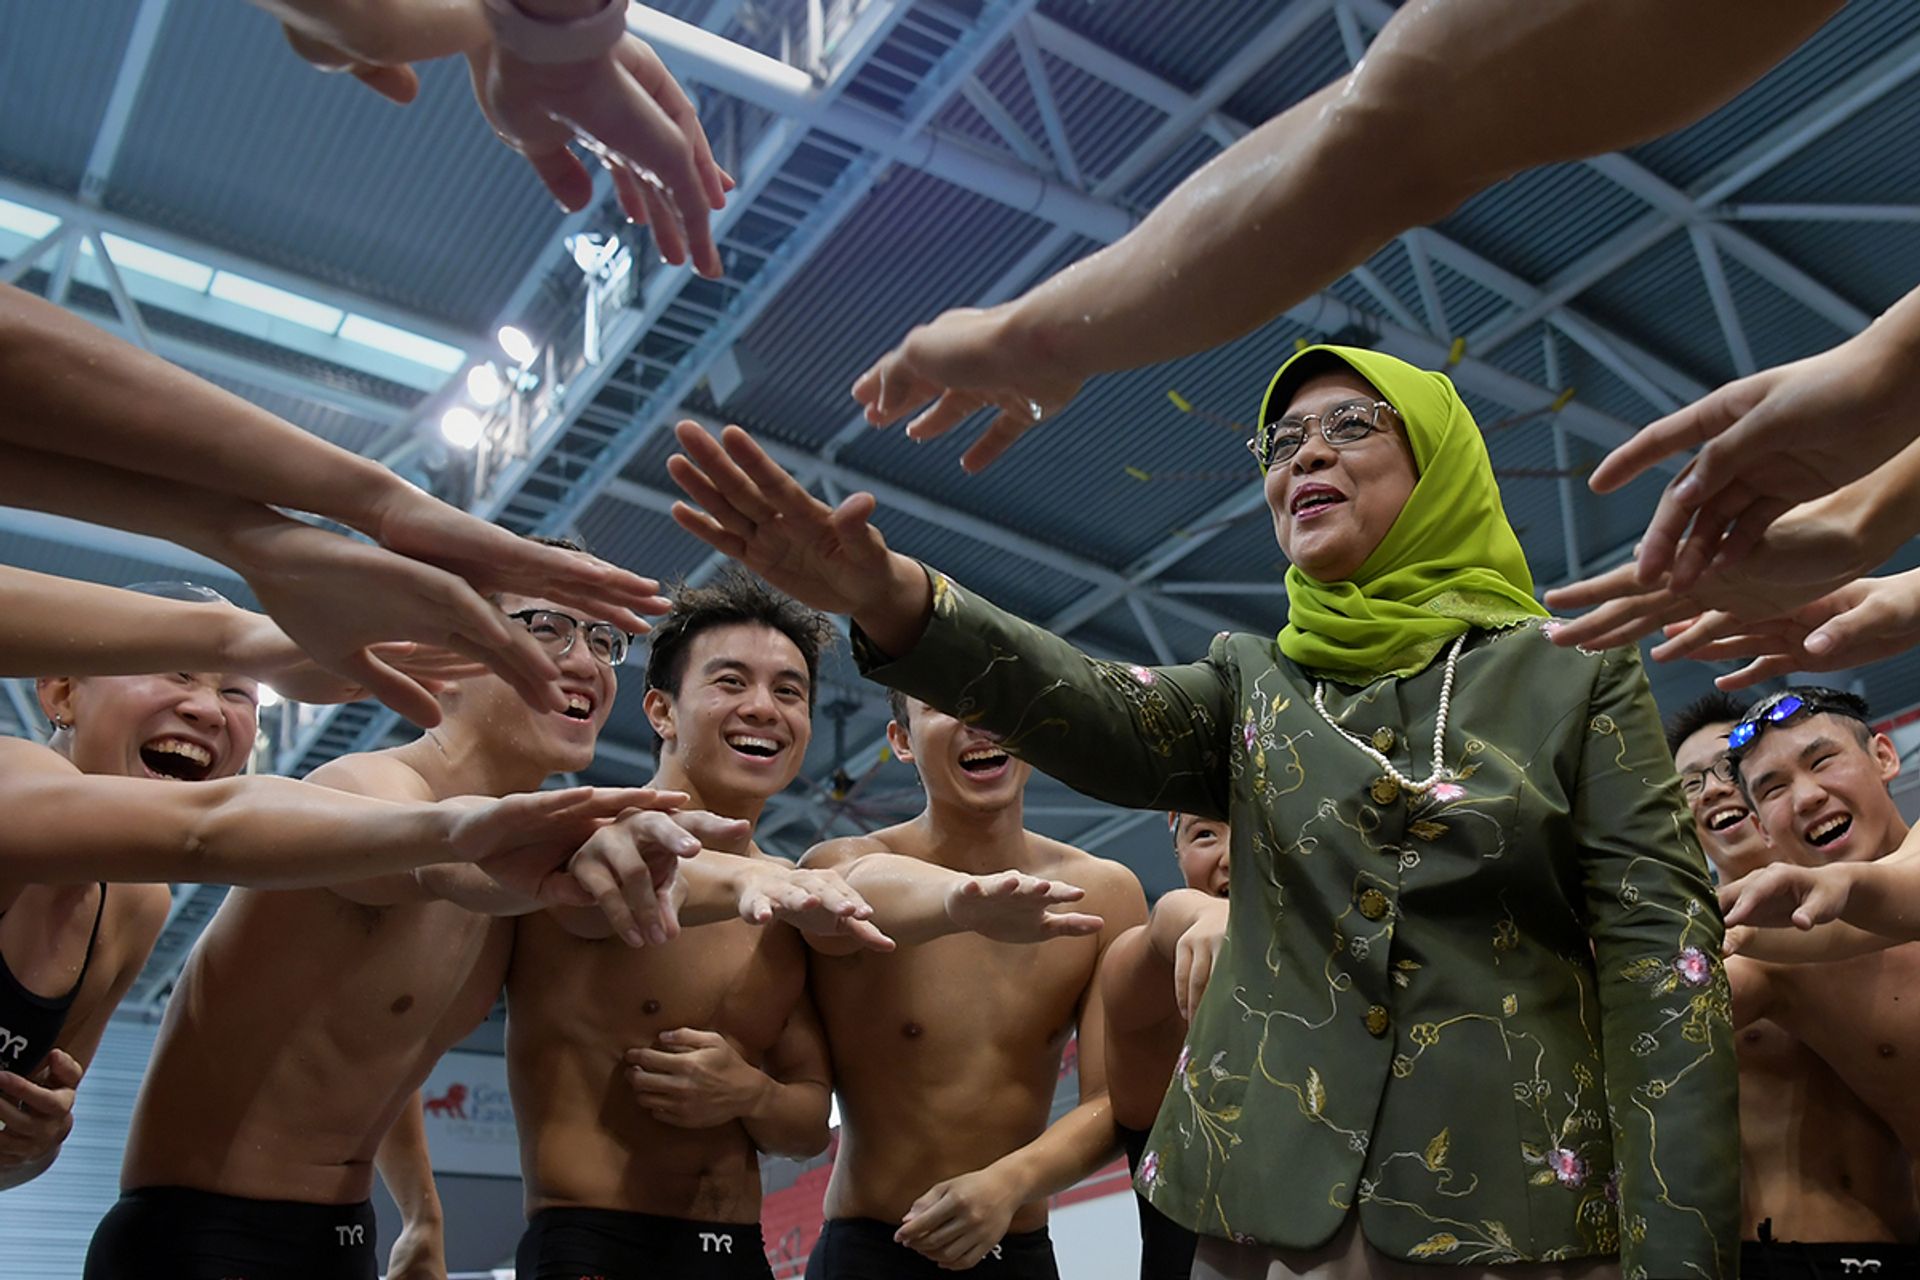 President Halimah taking part in a cheer with Team Singapore swimmers at the OCBC Aquatic Centre on June 5, 2018. She was visiting Team Singapore athletes – from swimming, boccia, pencak silat, water polo and sailing – who were preparing for the 2018 Asian Games held in Jakarta and Palembang, Indonesia. ST PHOTO: NG SOR LUAN